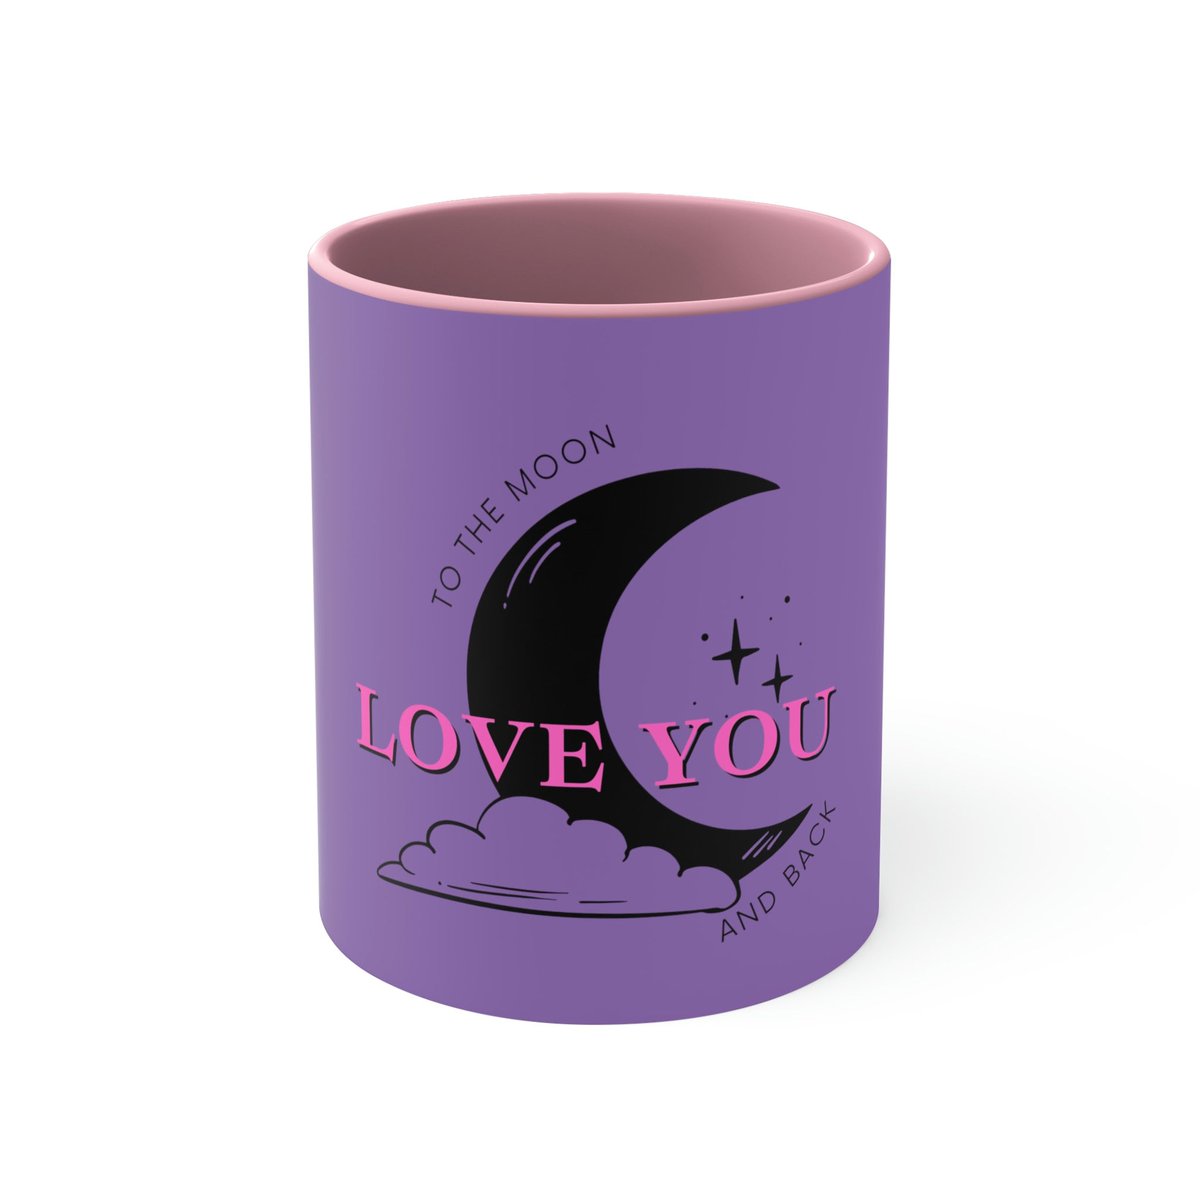 Excited to share the latest addition to my #etsy shop: Love You to the Moon and Back - Accent Coffee Mug, 11oz etsy.me/3CHxSuO #ourfamilysells #etsy #loveyoutothemoon #loveyou #cute